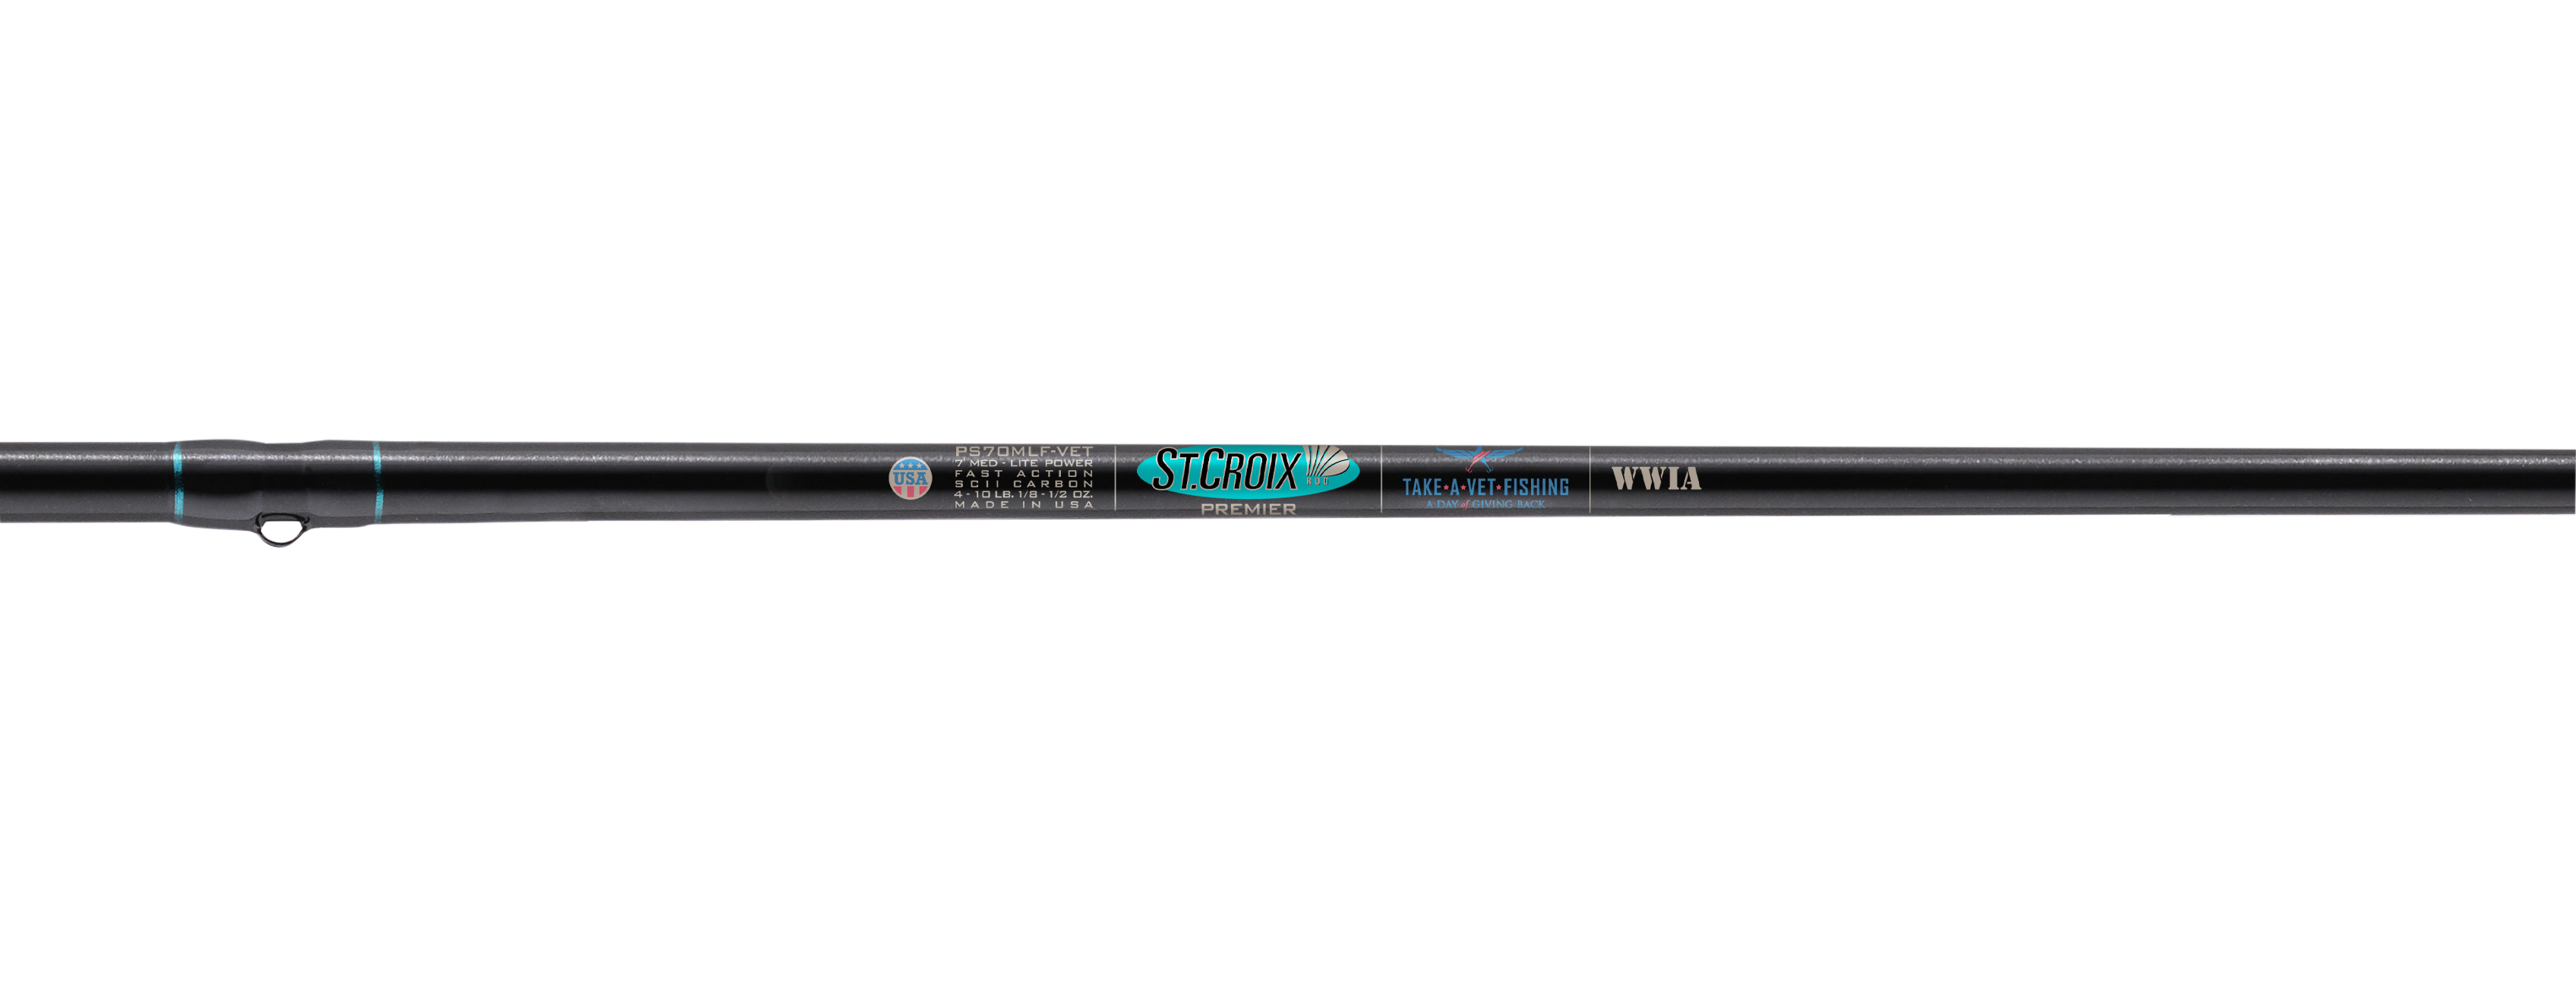 PREMIER SPINNING ROD 2023 VETERAN'S DAY LIMITED EDITION - St